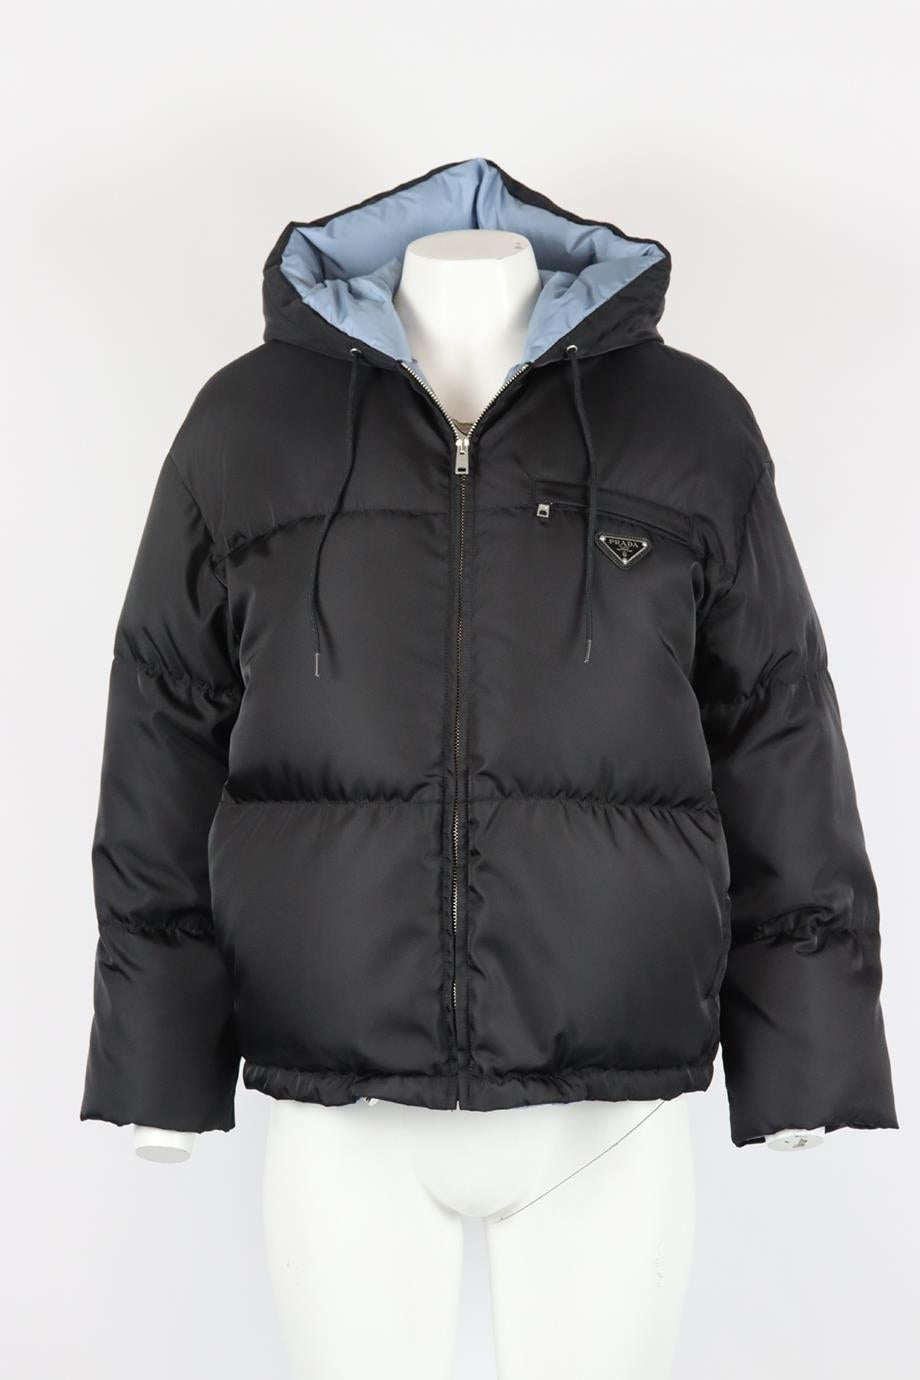 Prada hooded logo appliquéd quilted shell down jacket. Black and blue. Long sleeve, crewneck. Zip fastening at front. 100% Recycled polyamide; lining: 100% polyamide; padding: white goose down and feathers (90% down); filler bag: 100% polyester.